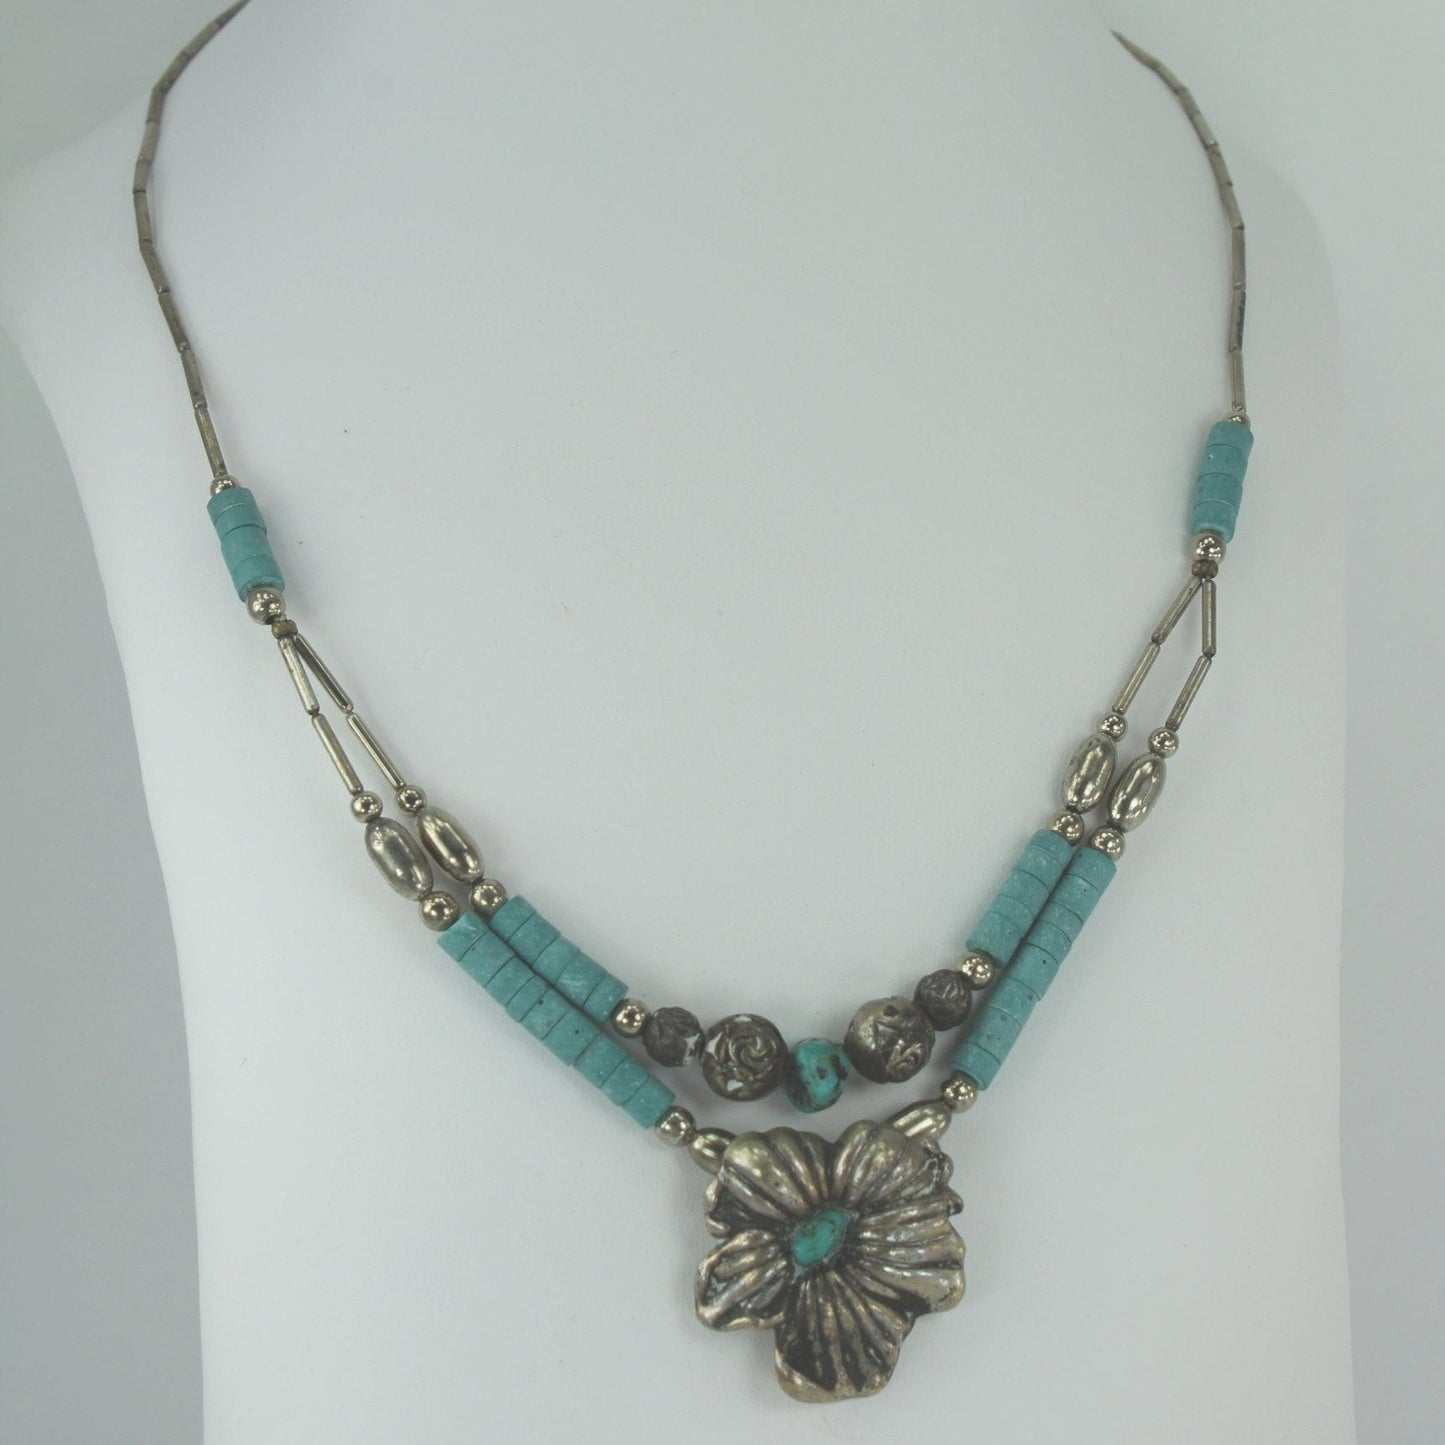 Southwest Necklace Turquoise Silver Beads Flower Focal 2 Strand